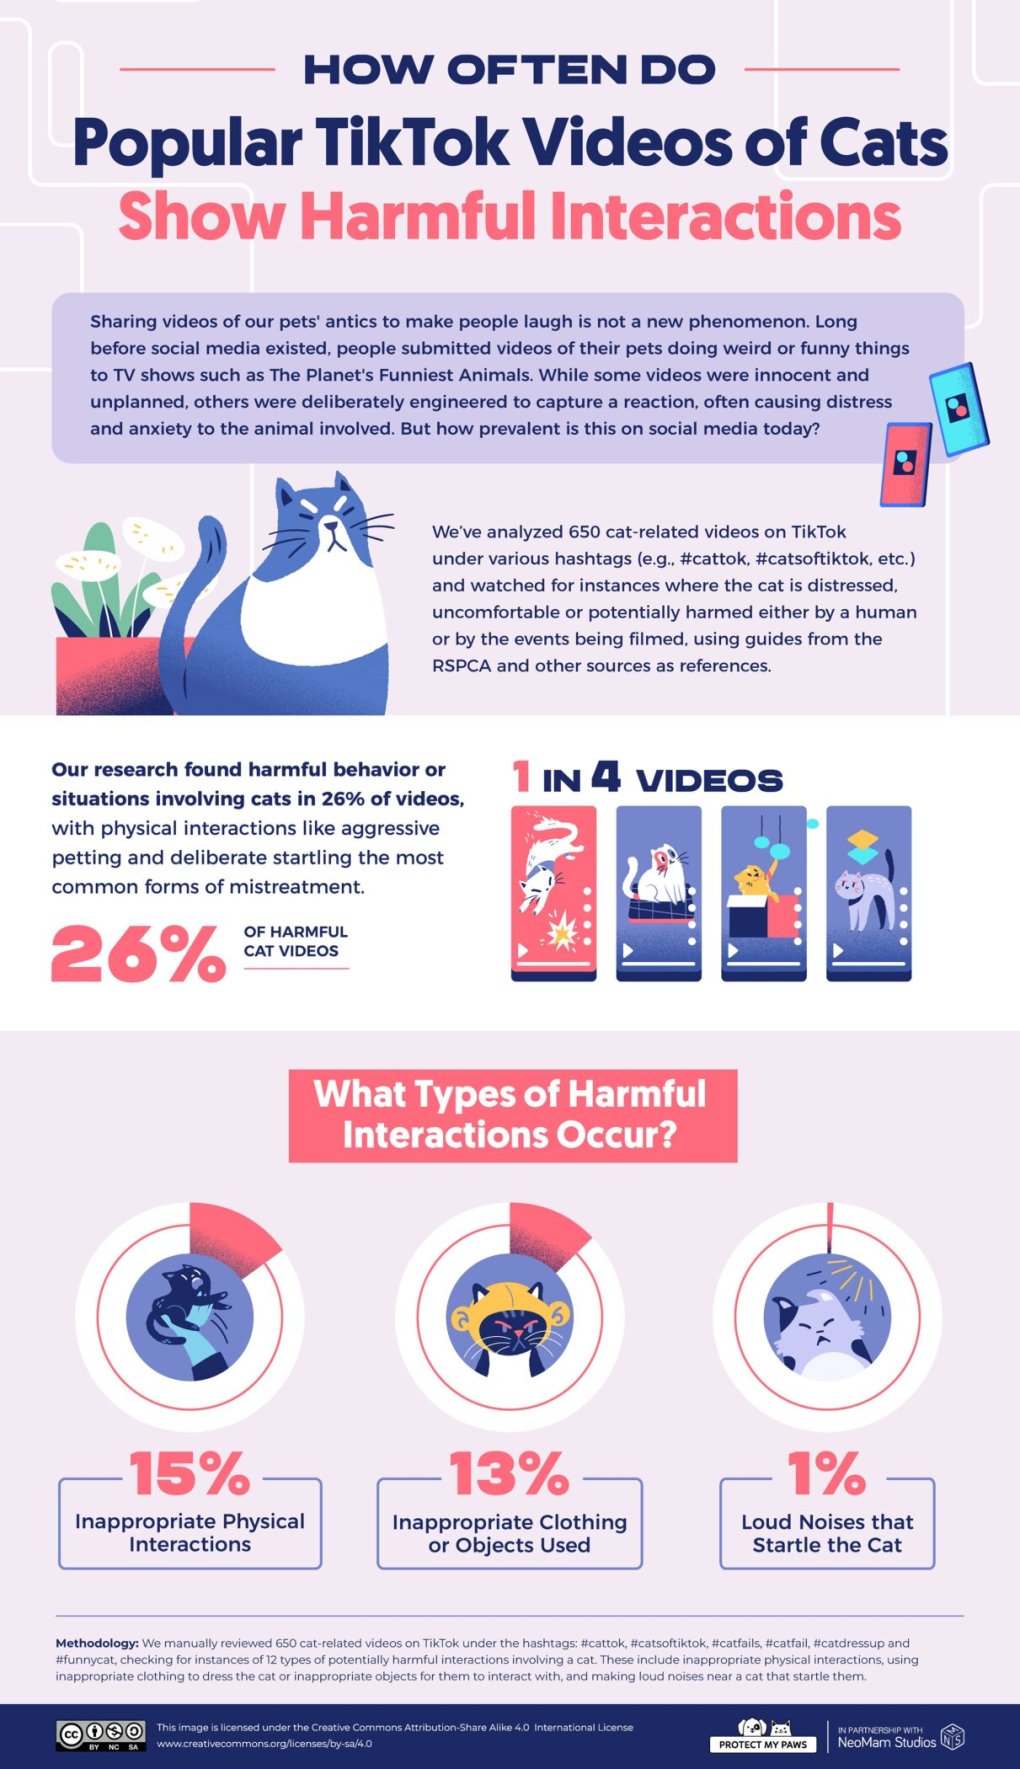 The Harmful Interactions with Cats on TikTok: Prevalence, Impact, and Viewer Response